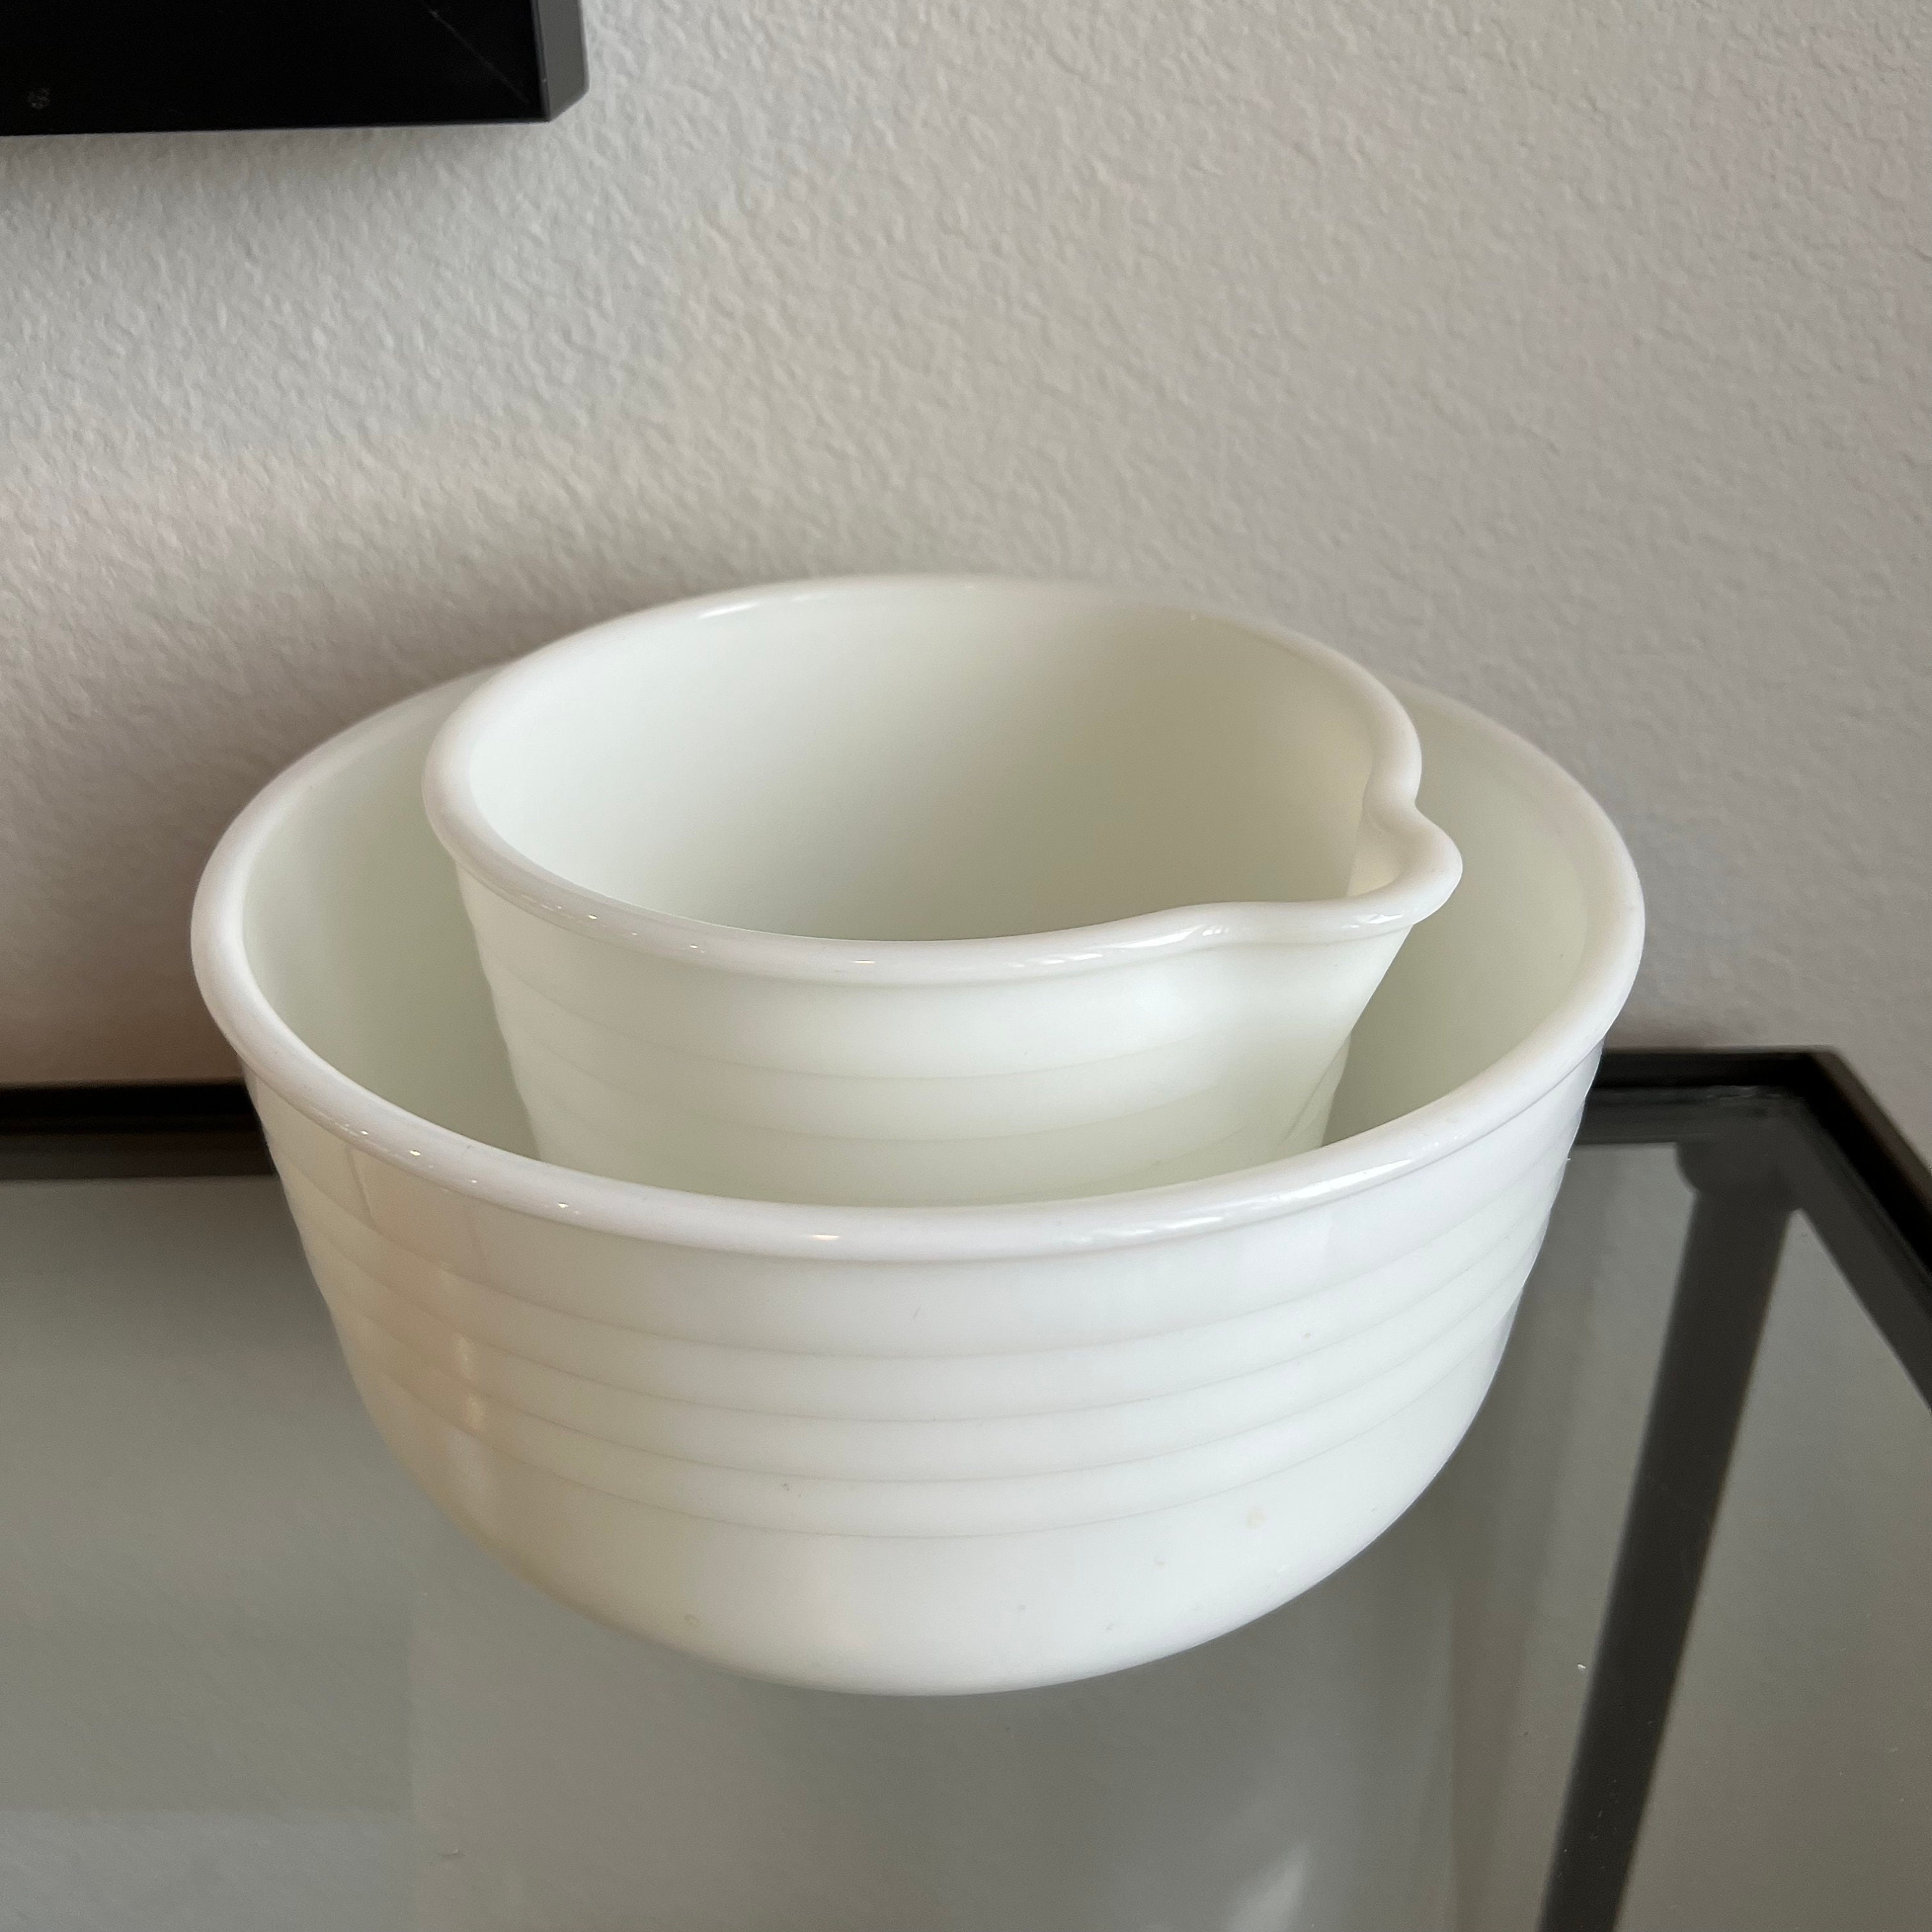 This mighty Pyrex measuring bowl I bought for $10 at a thrift